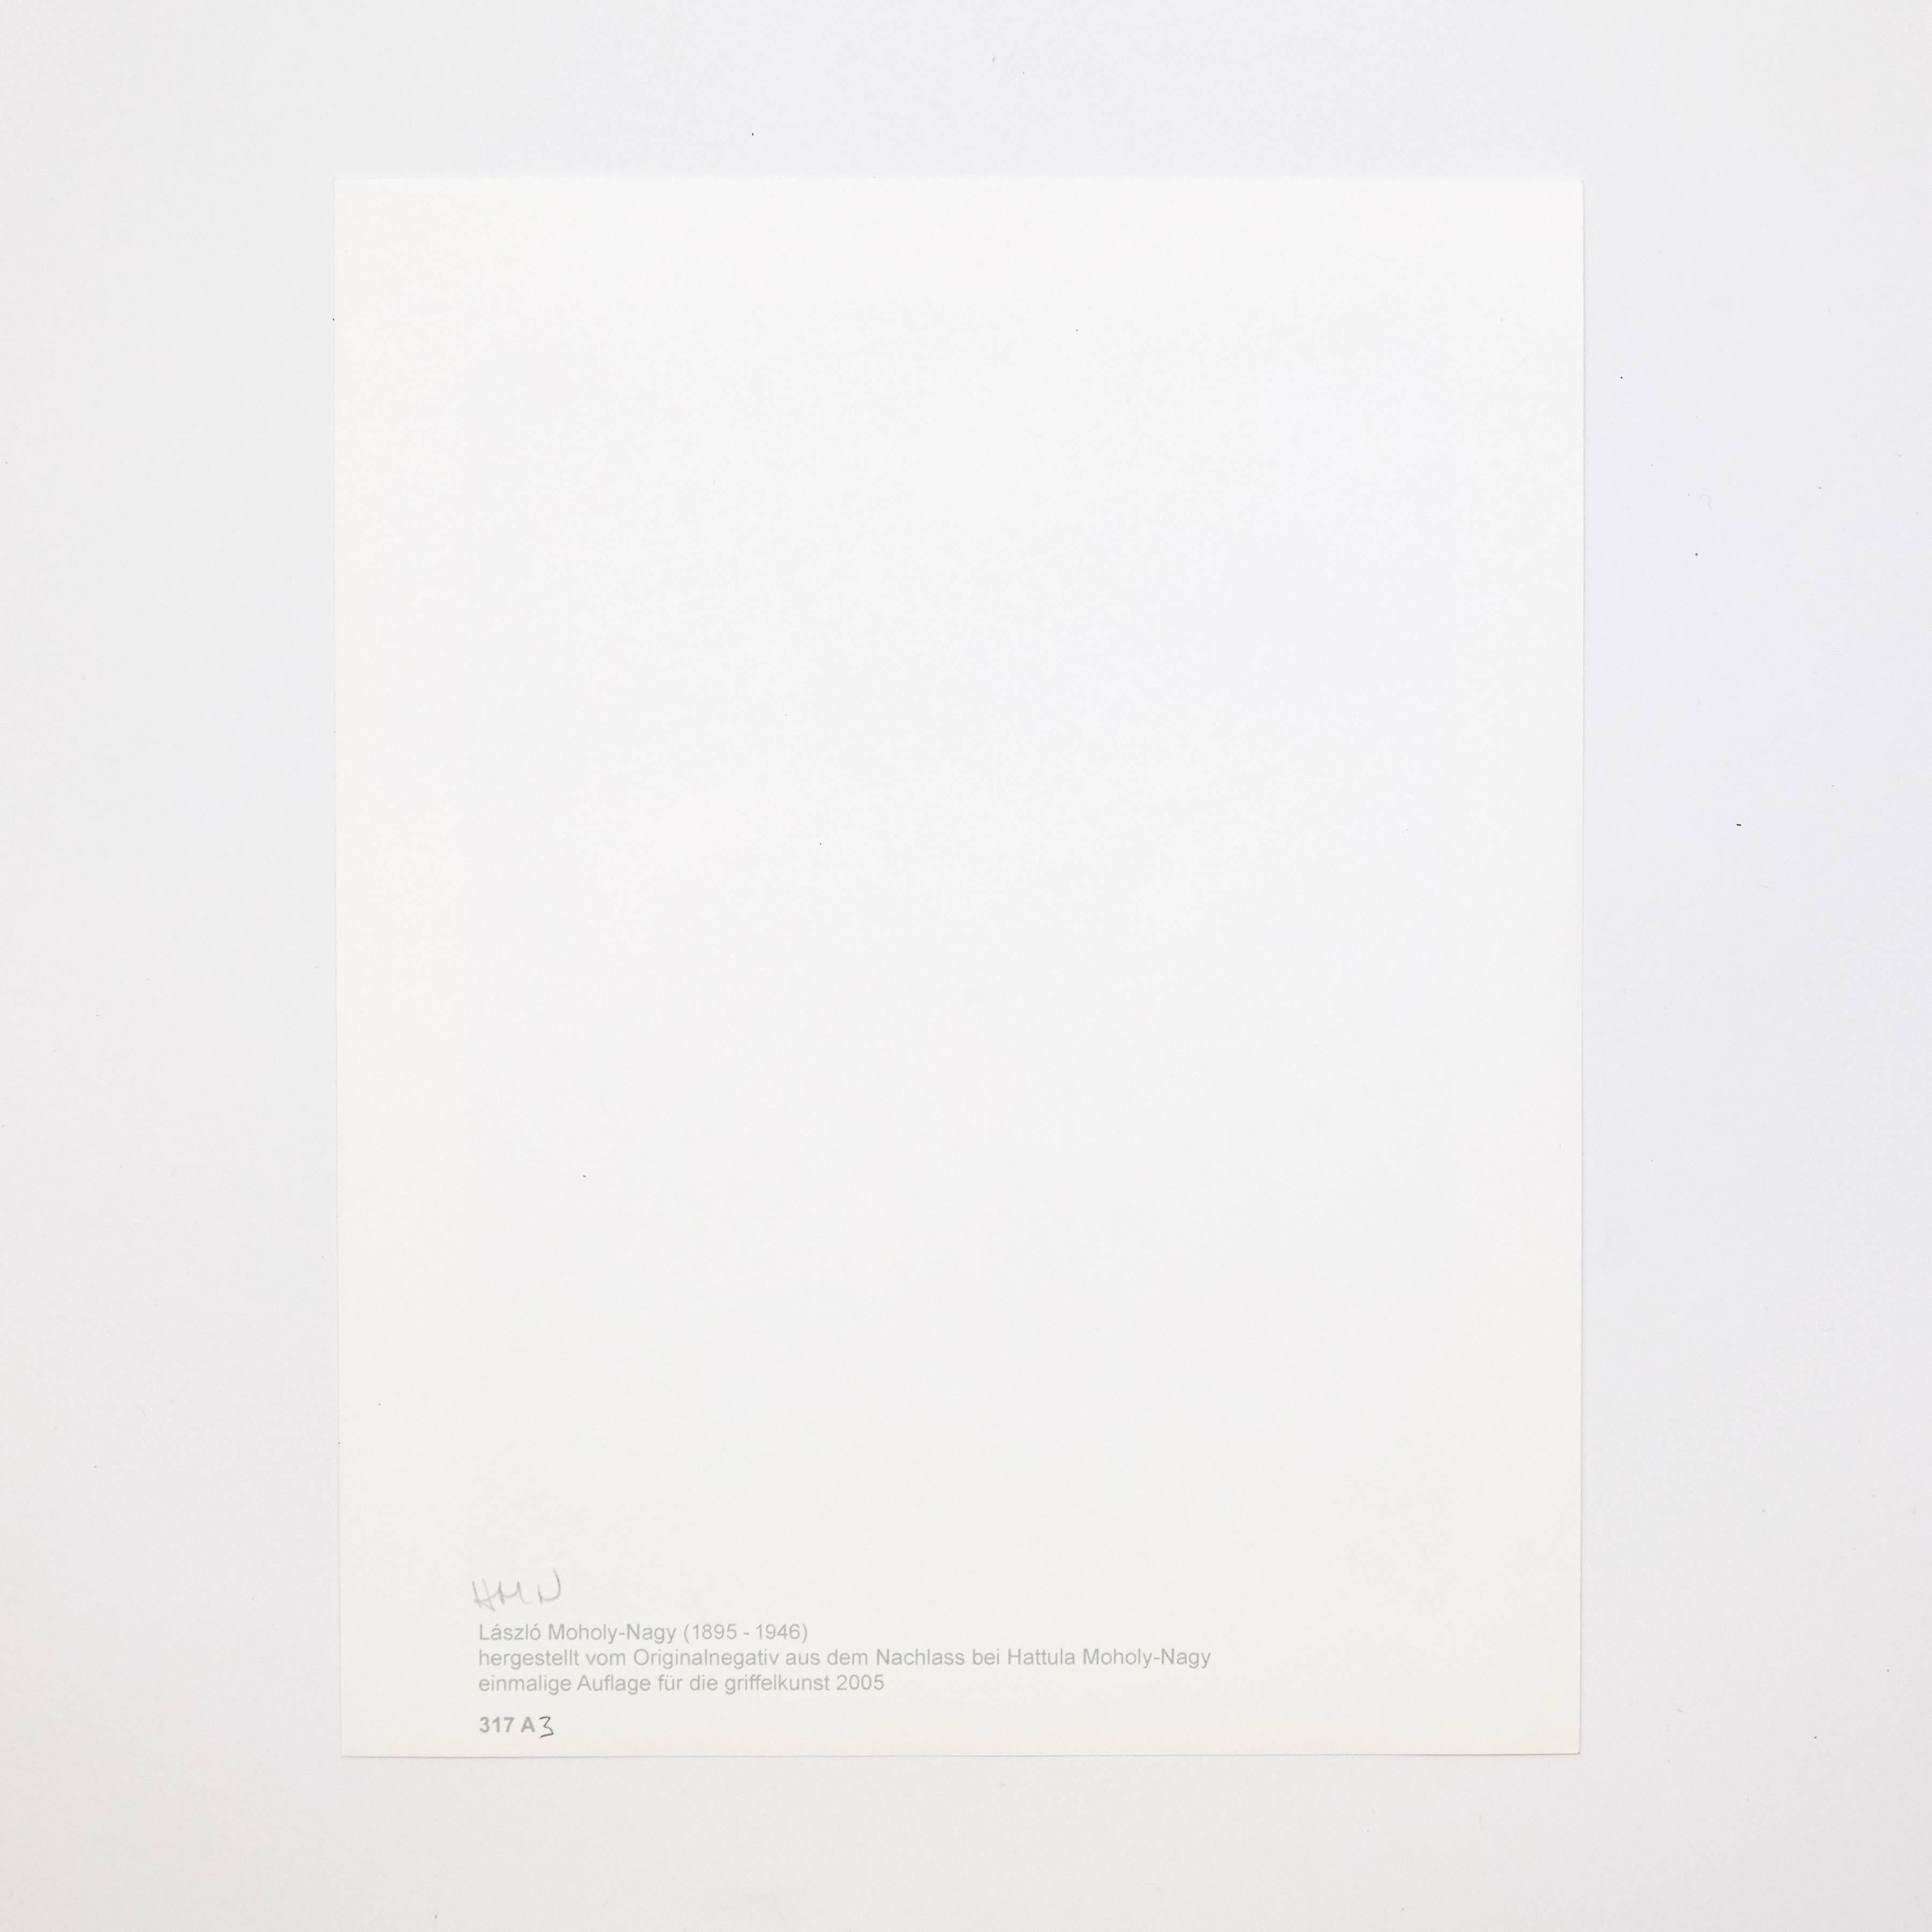 László Moholy-Nagy photography 3/6 from a set of 6 photographies.
Single edition of 'Light-Room Modulations' folder, original title 'Licht-Raum Modulationen.'
Published by Edition Griffelkunst in Hamburg, 2005.

On verso monogrammed and